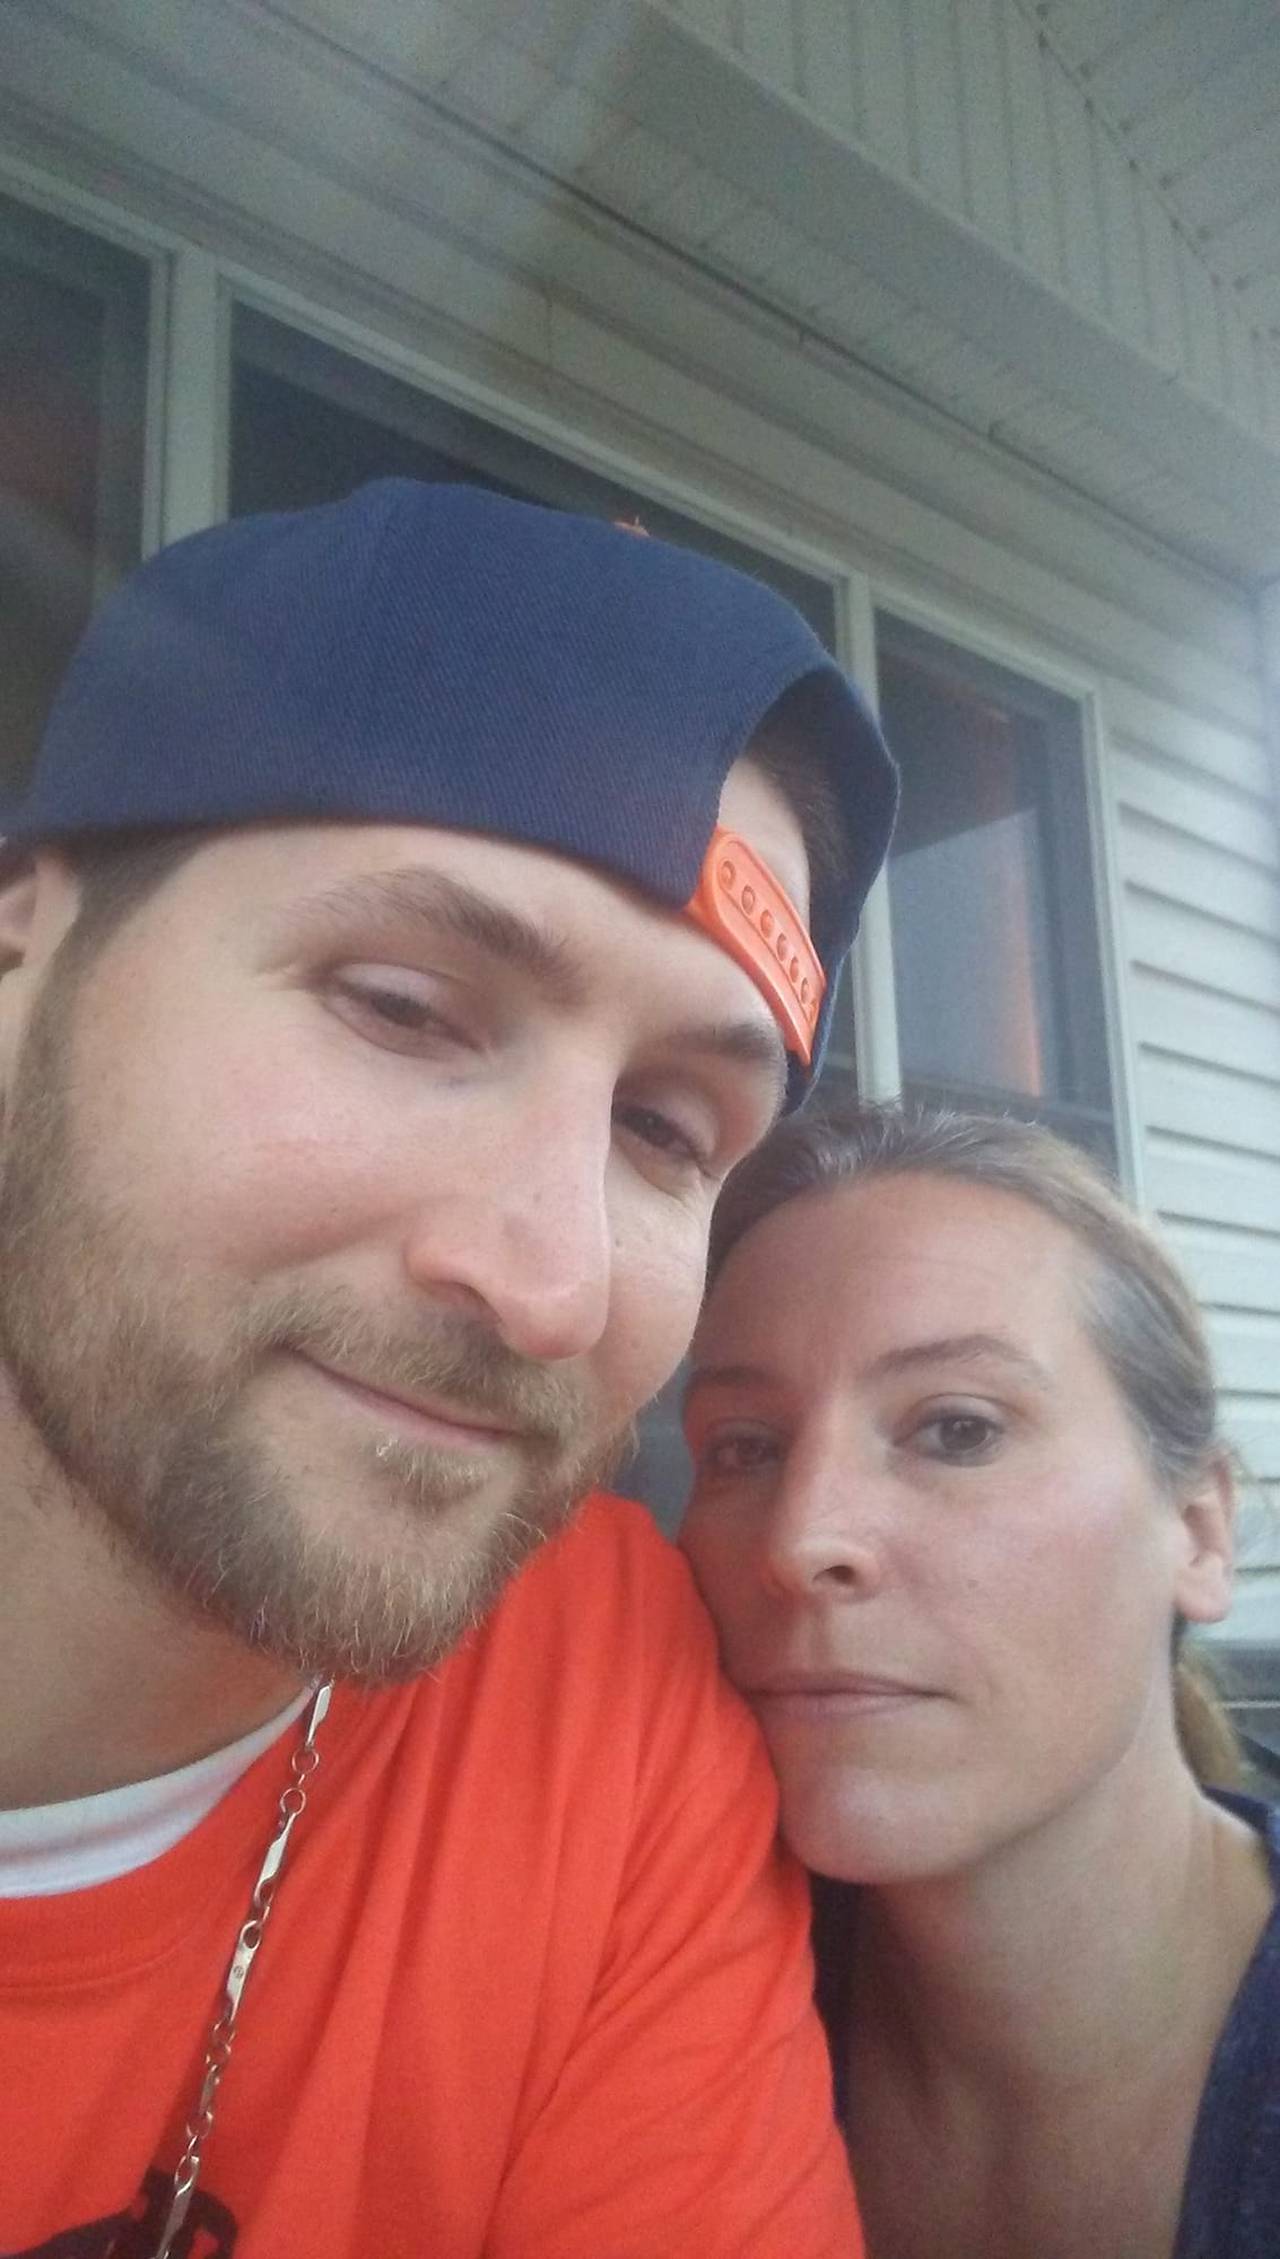 Christopher Wright and Tracy Karopchinsky have been together for 13 years. The Brooklyn Park man died Saturday after a fight the night before in front of their home.